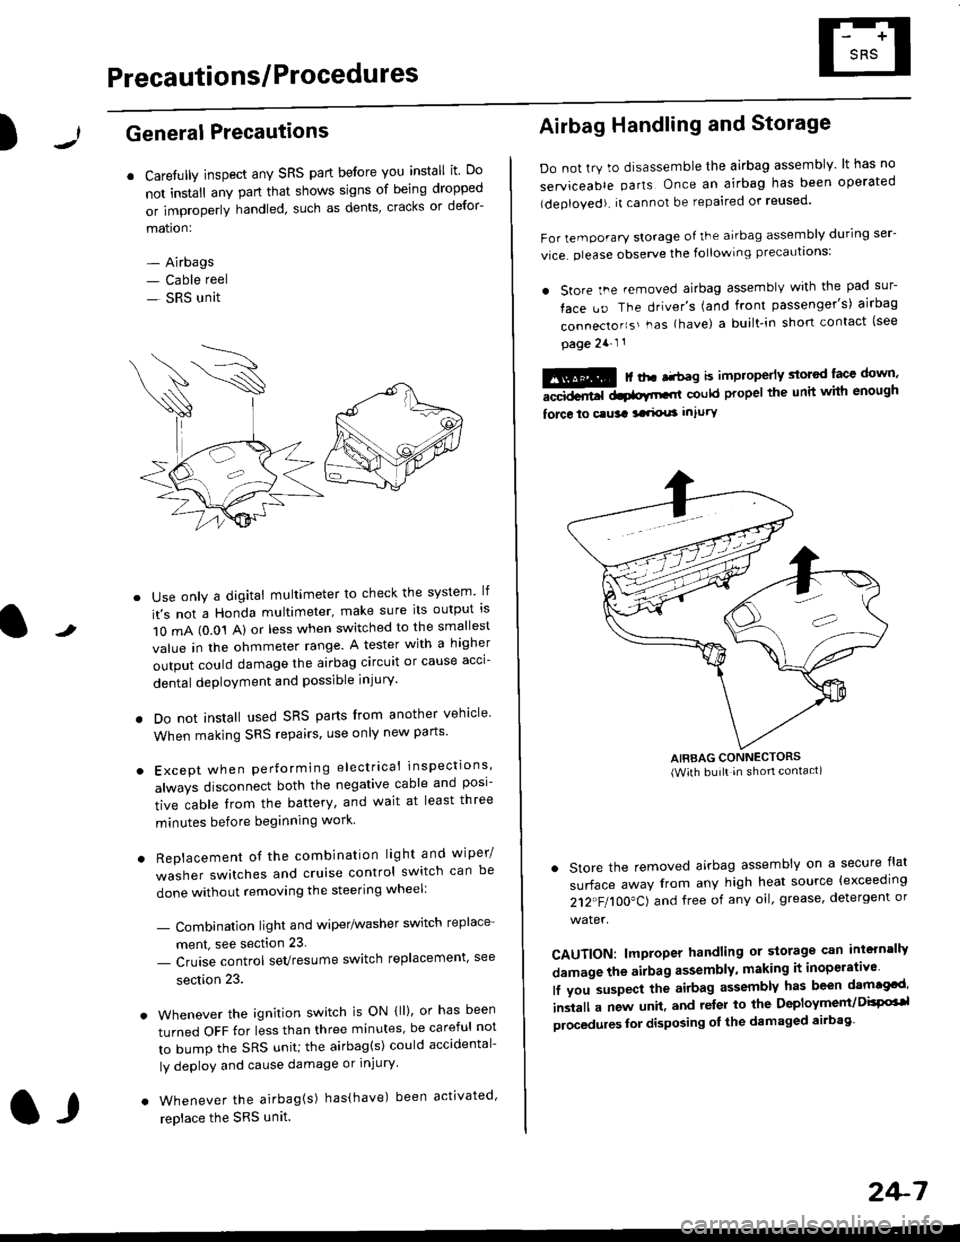 HONDA CIVIC 1996 6.G Workshop Manual Precautions/ Procedures
)General Precautions
r Carefully inspect any SRS part before you install it Do
not install any part that shows signs of being dropped
or improperly handled such as dents, crac